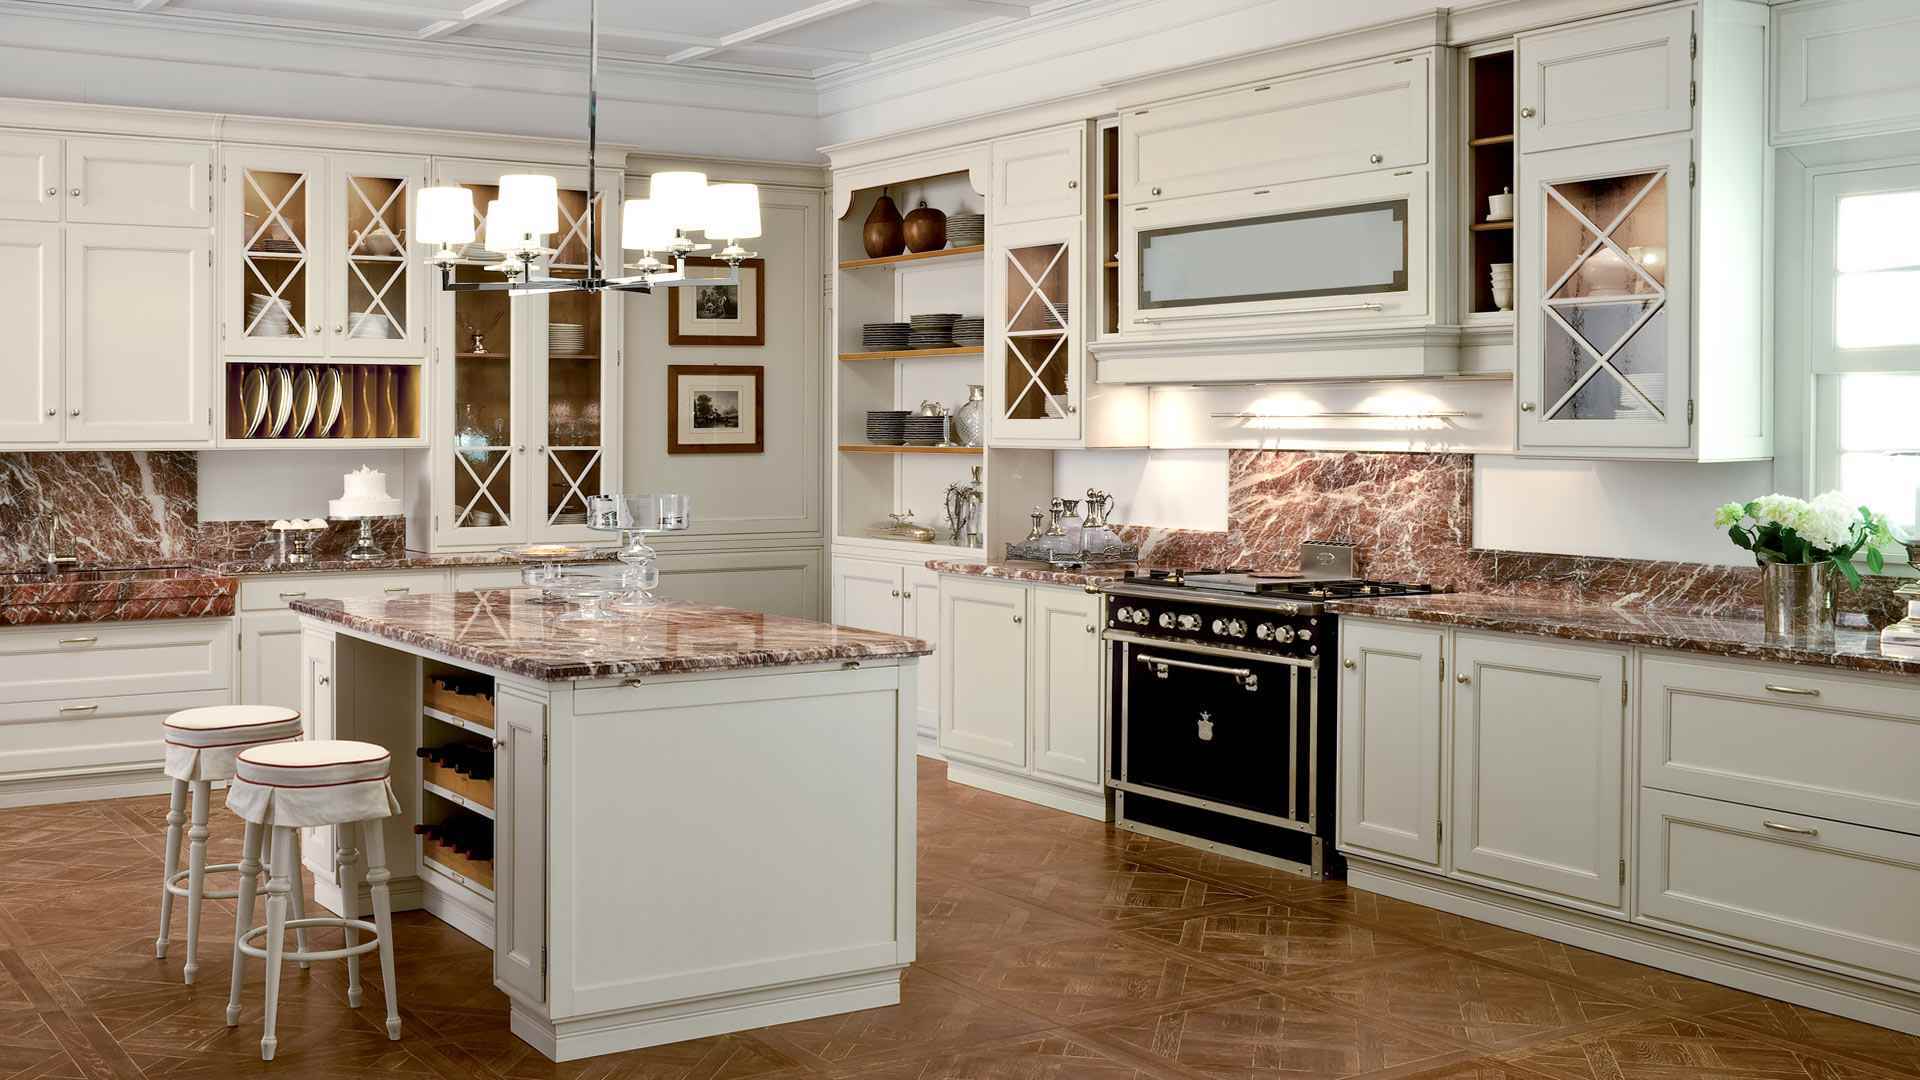 version of a light style kitchen in a classic style